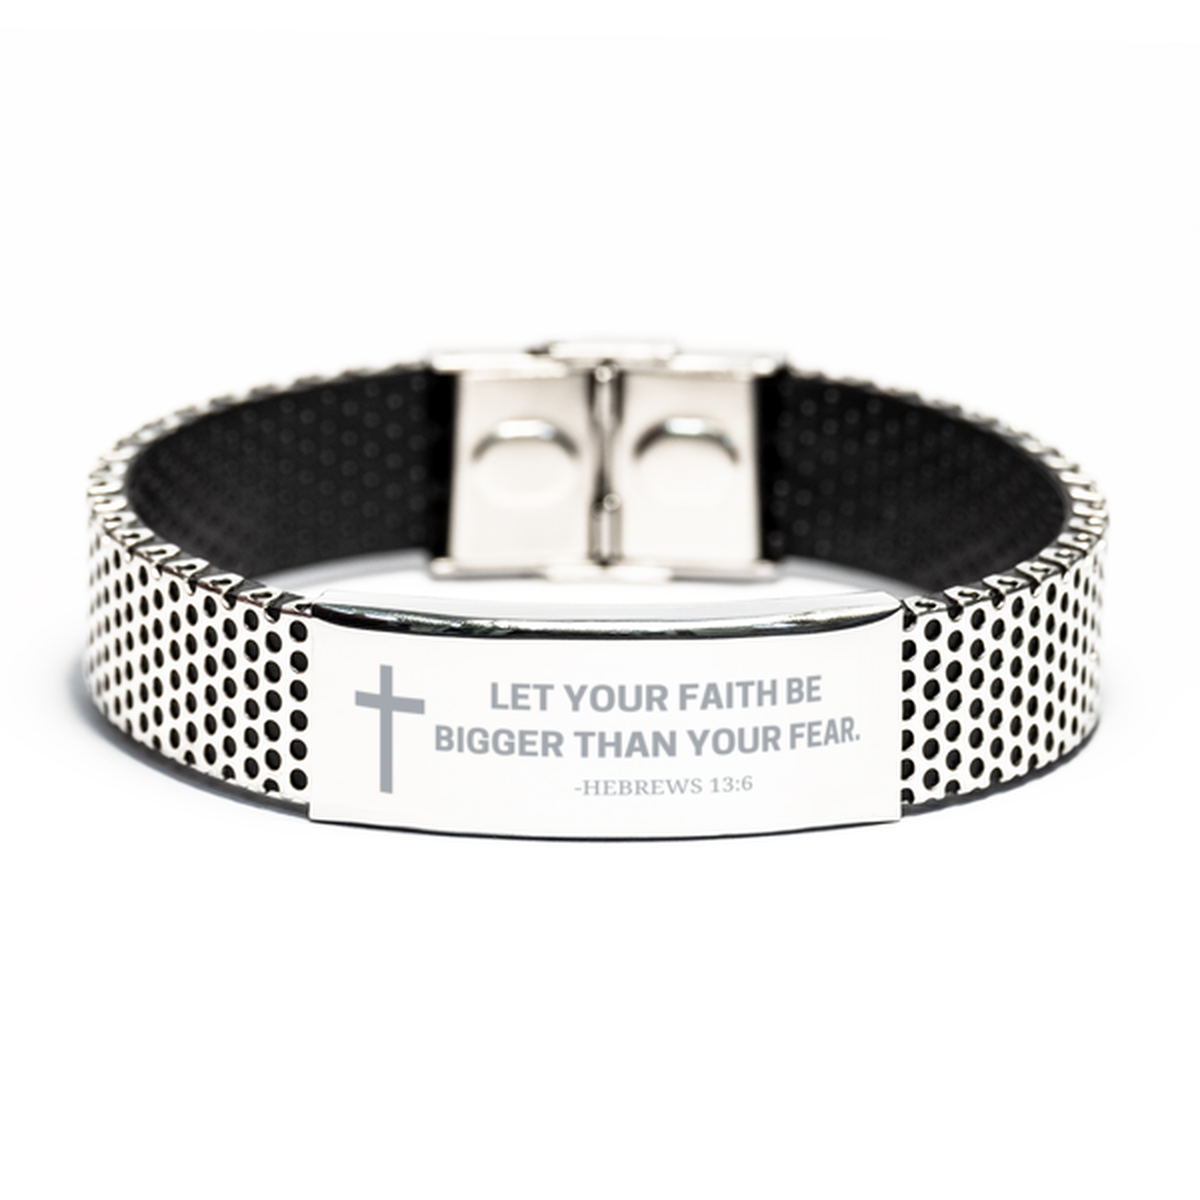 Baptism Gifts For Teenage Boys Girls, Christian Bible Verse Stainless Steel Bracelet, Let your faith be bigger than your fear, Catholic Confirmation Gifts for Son, Godson, Grandson, Nephew